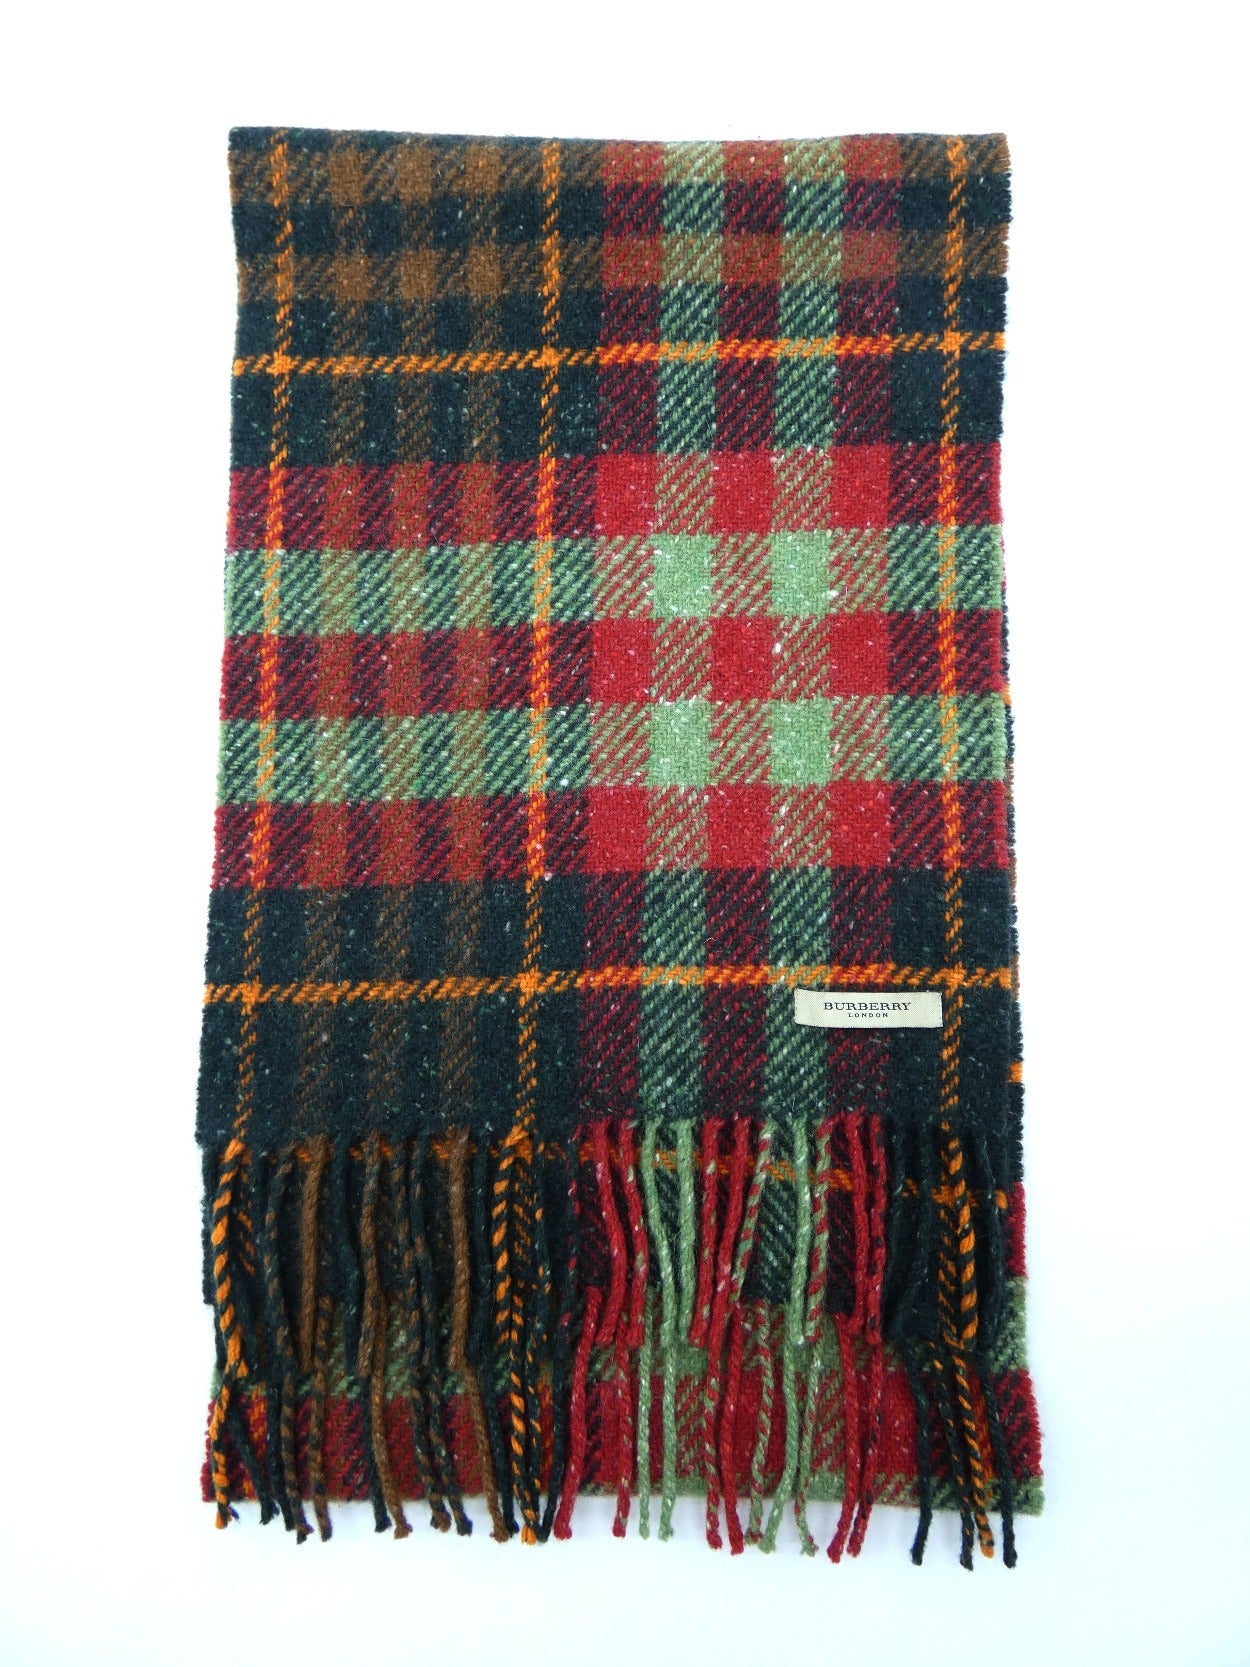 Burberry Merino Wool Angora and Cashmere Plaid Red Scarf Scarf Burberry